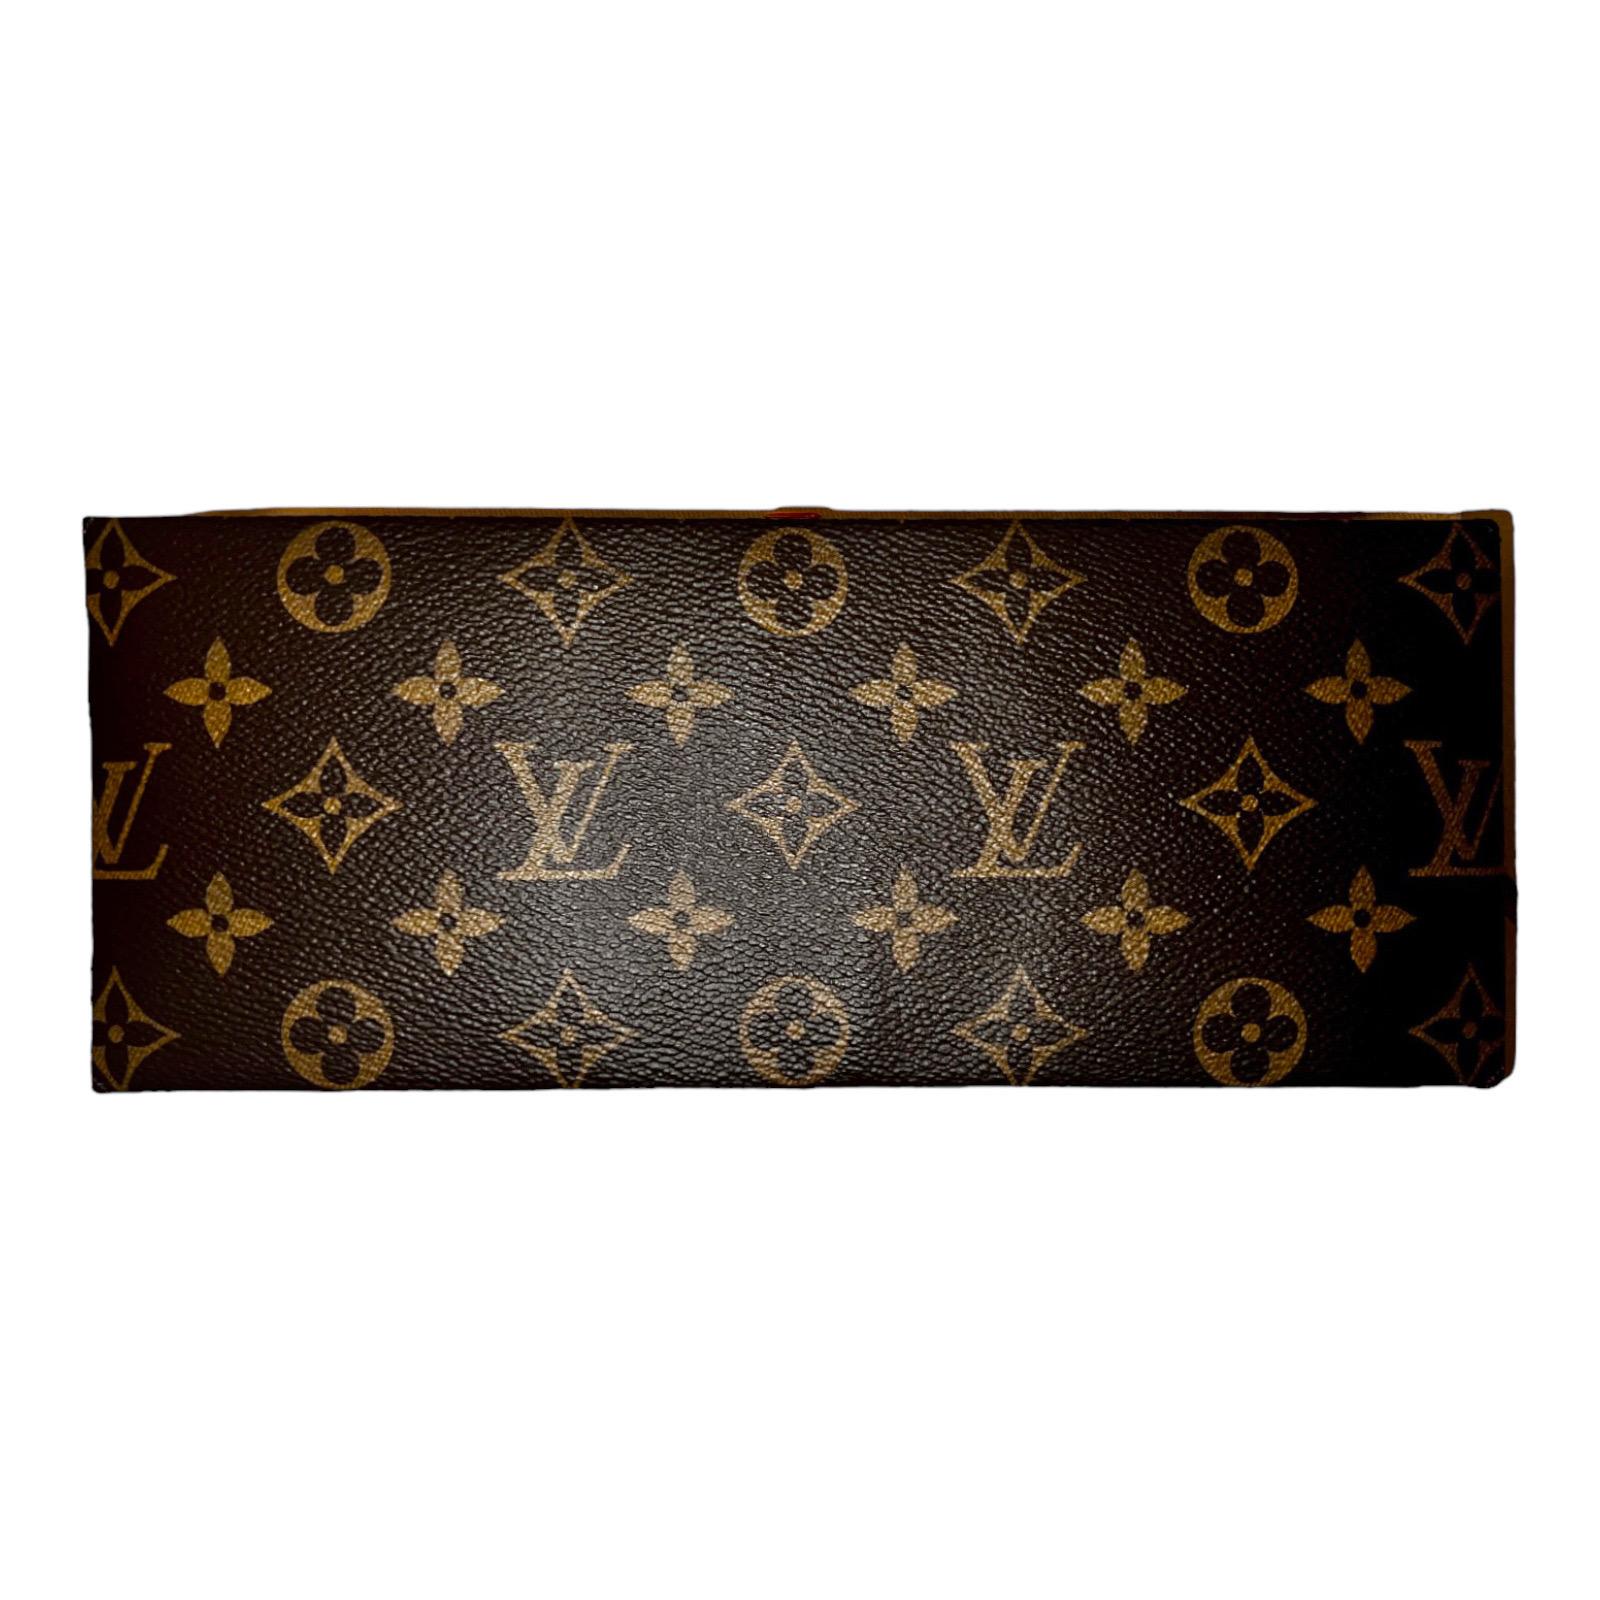 NEW Louis Vuitton Chopsticks Set in Pouch - 2 Pairs For Sale 2